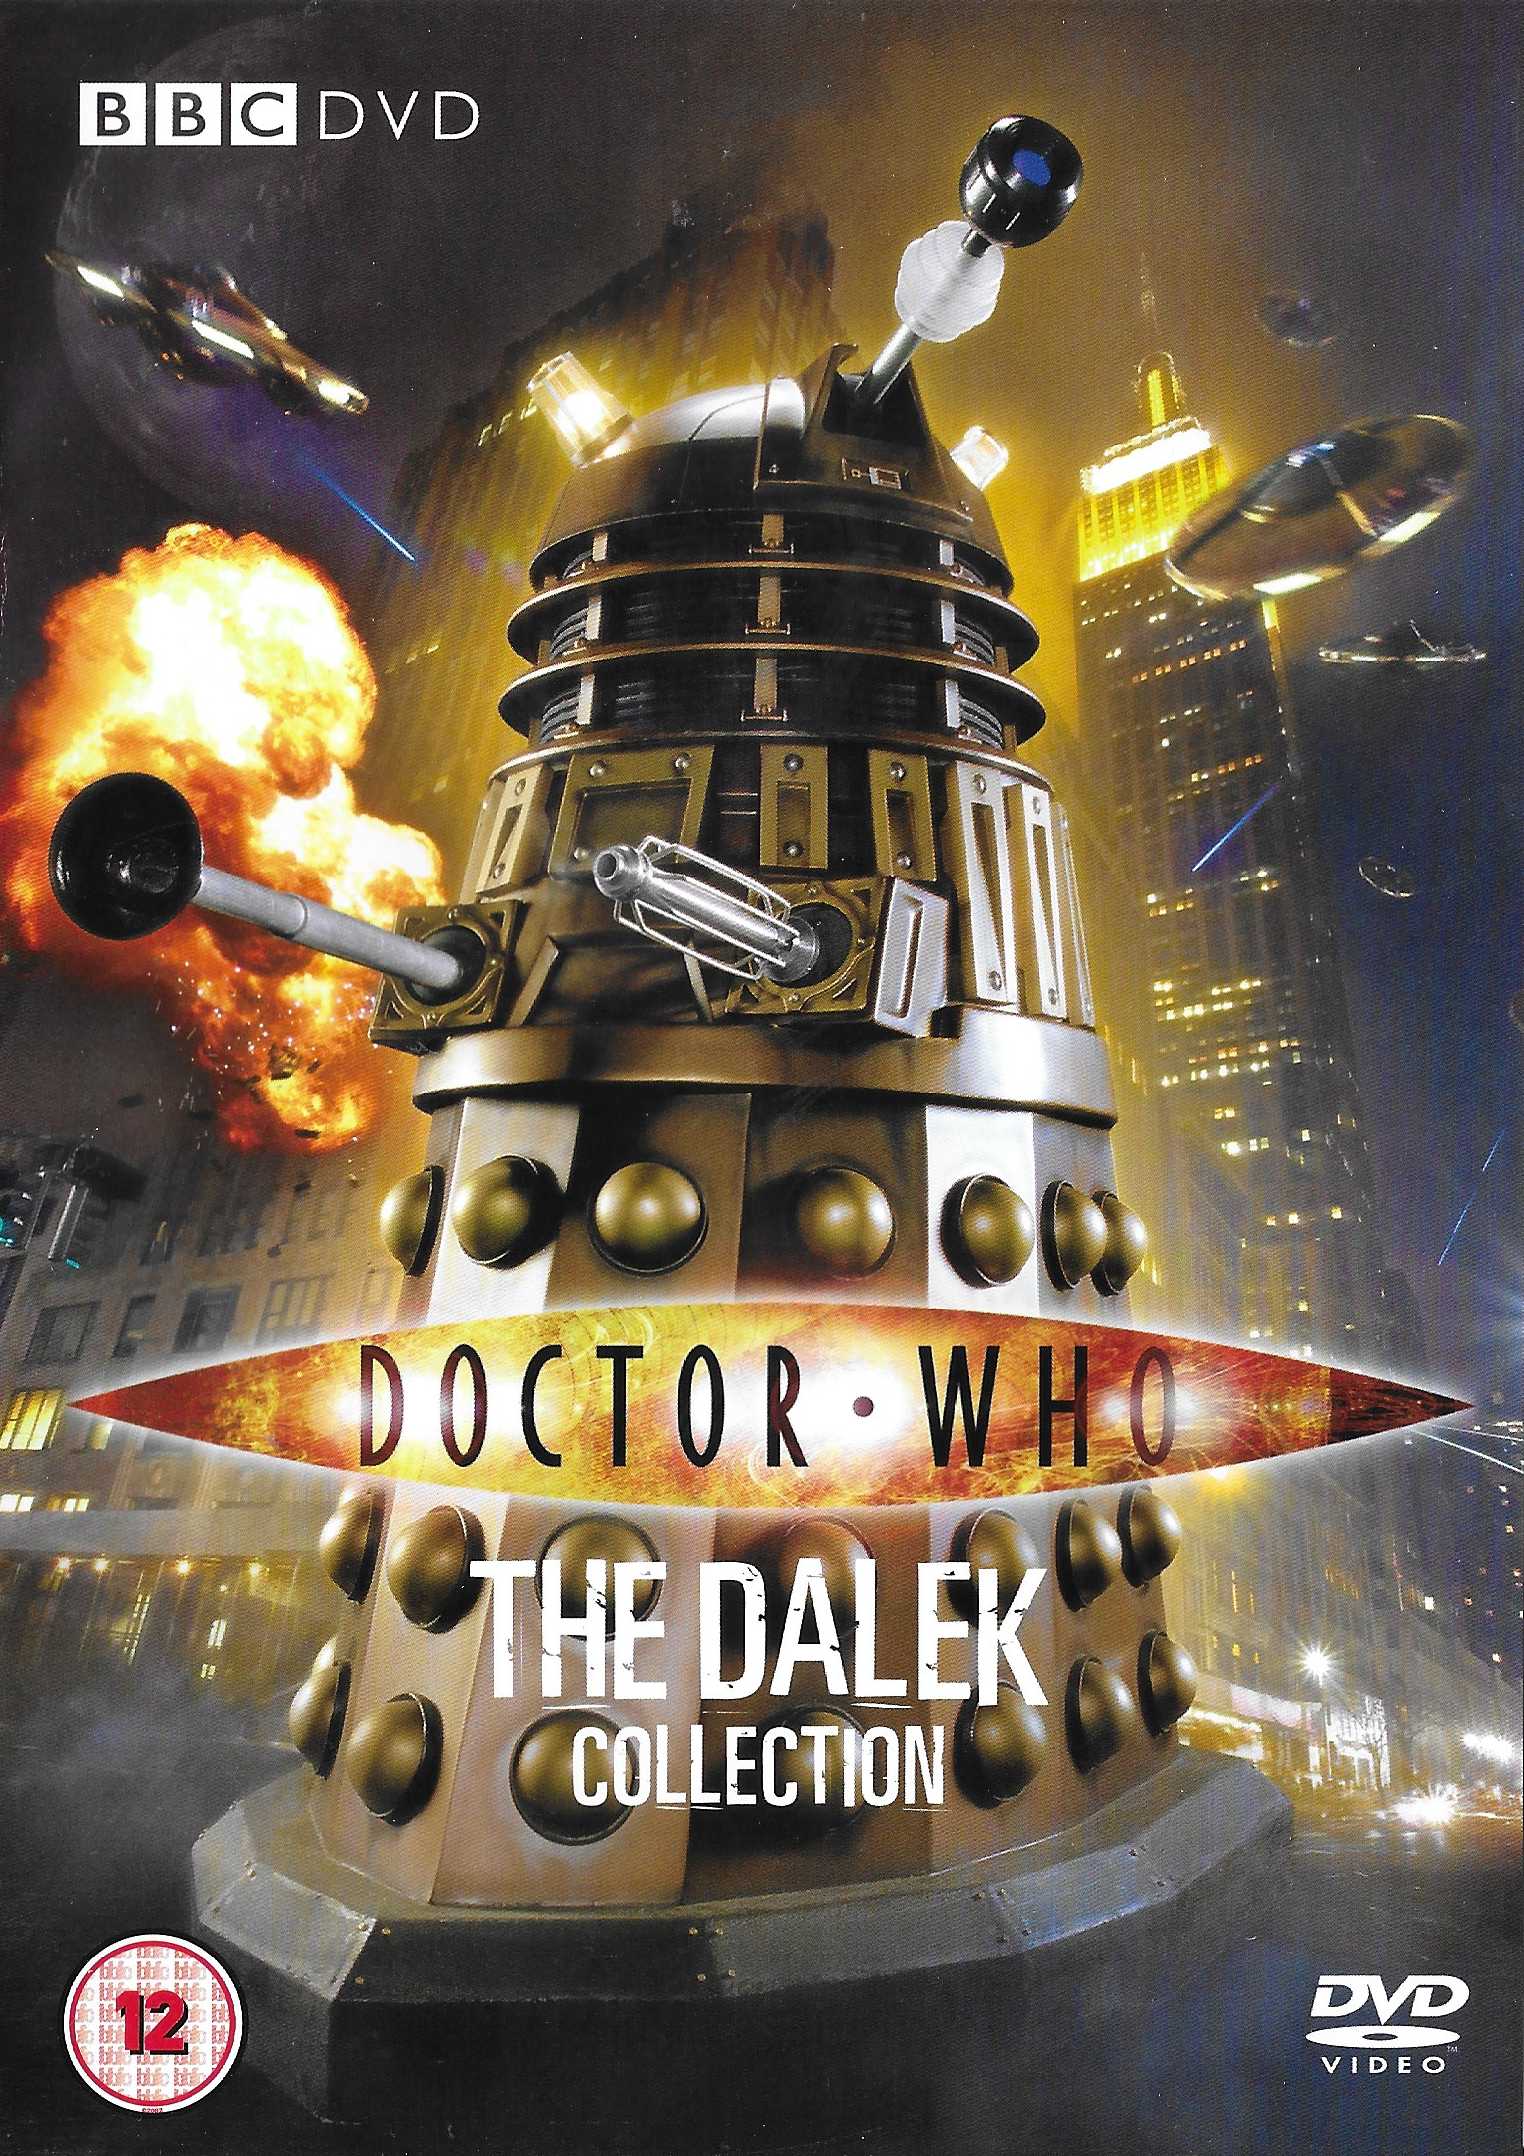 Picture of BBCDVD 2998 Doctor Who - The Dalek collection by artist Robert Shearman / Helen Raynor / Russell T Davies from the BBC records and Tapes library